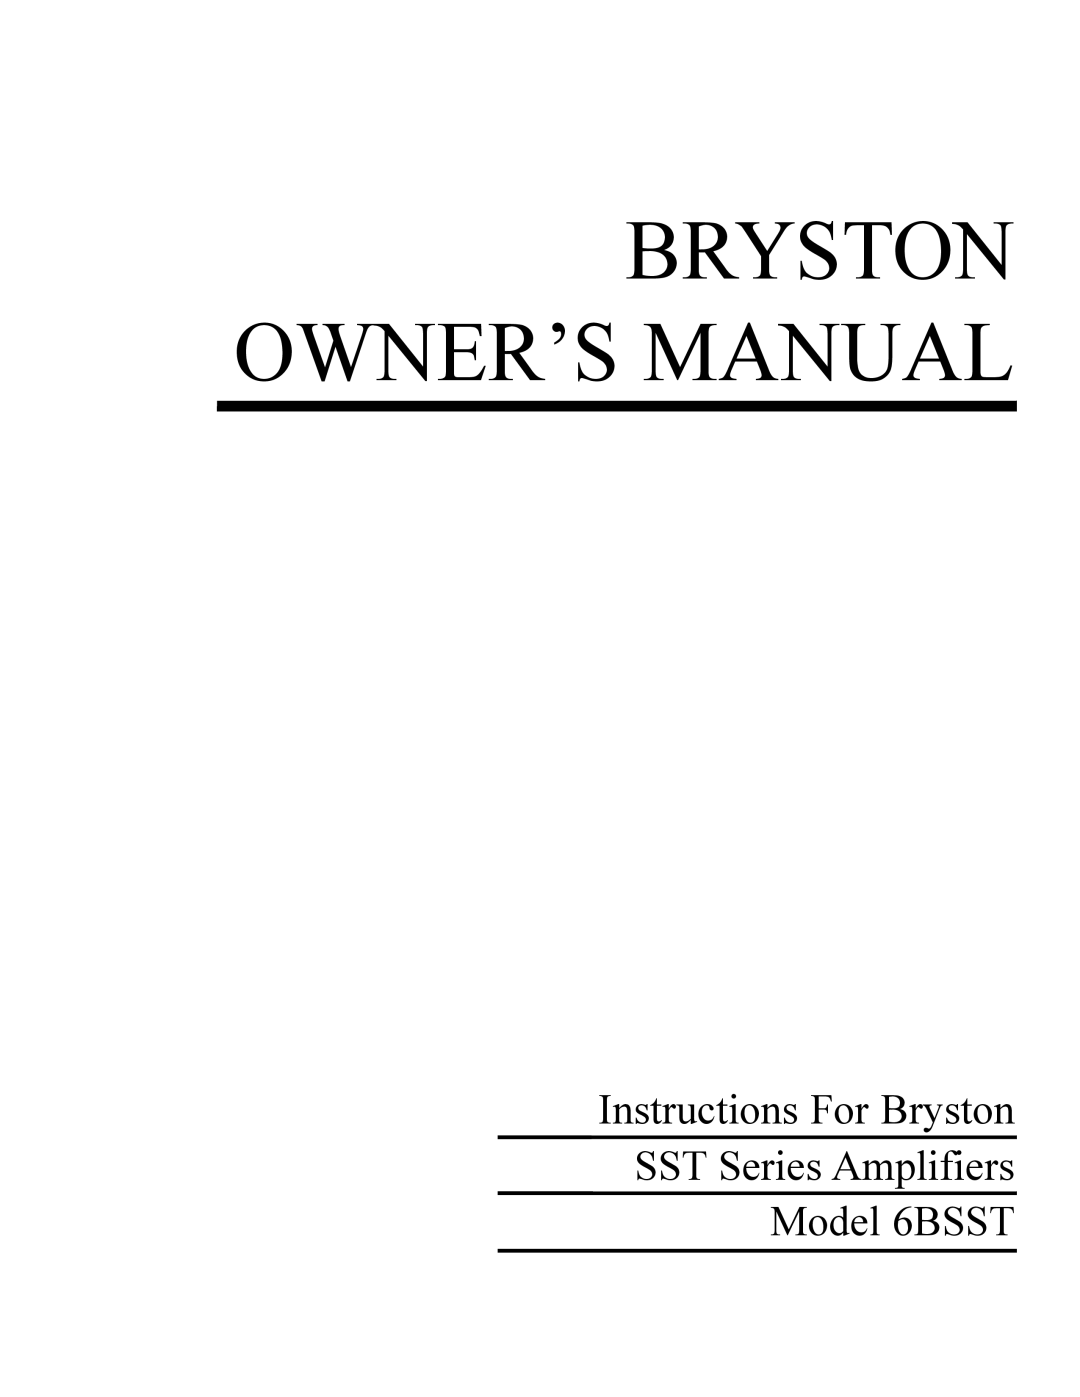 Bryston owner manual Instructions For Bryston SST Series Amplifiers, Model 6BSST 